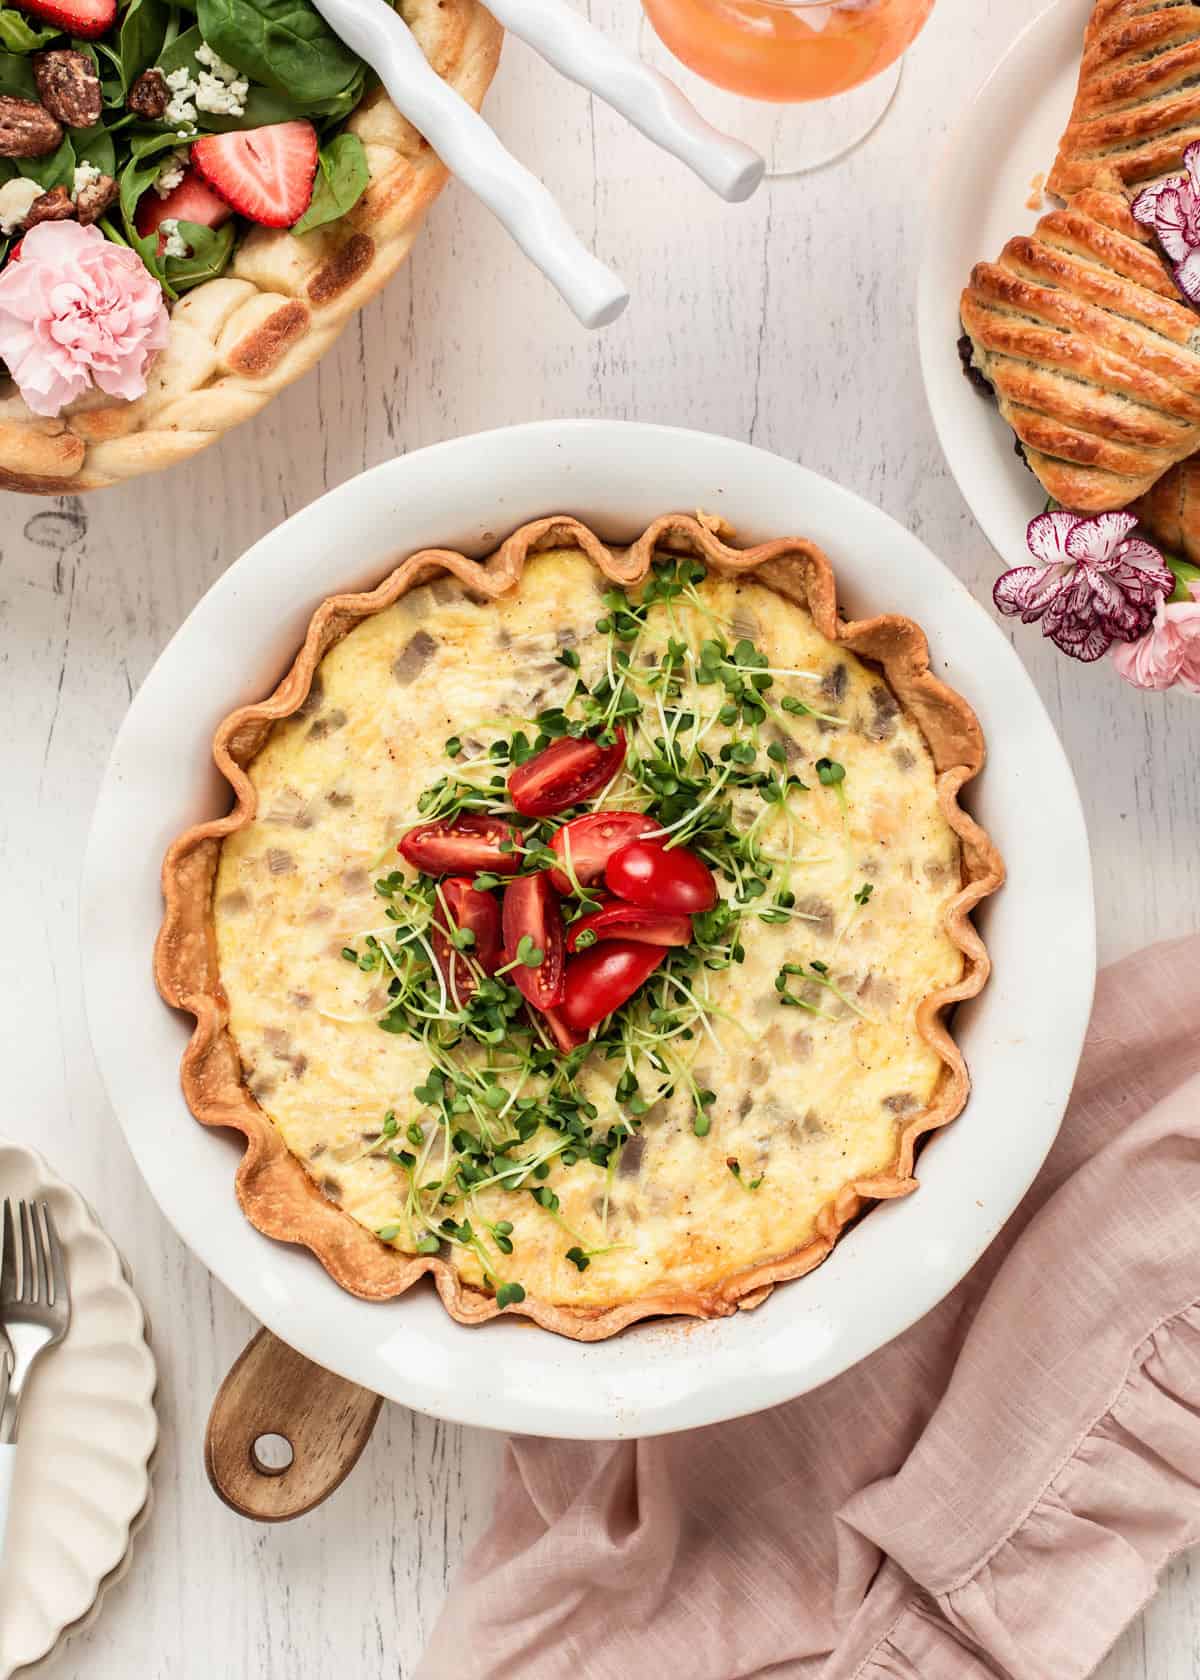 quiche garnished with microgreens and cherry tomatoes, sitting on white table surrounded by other brunch foods.